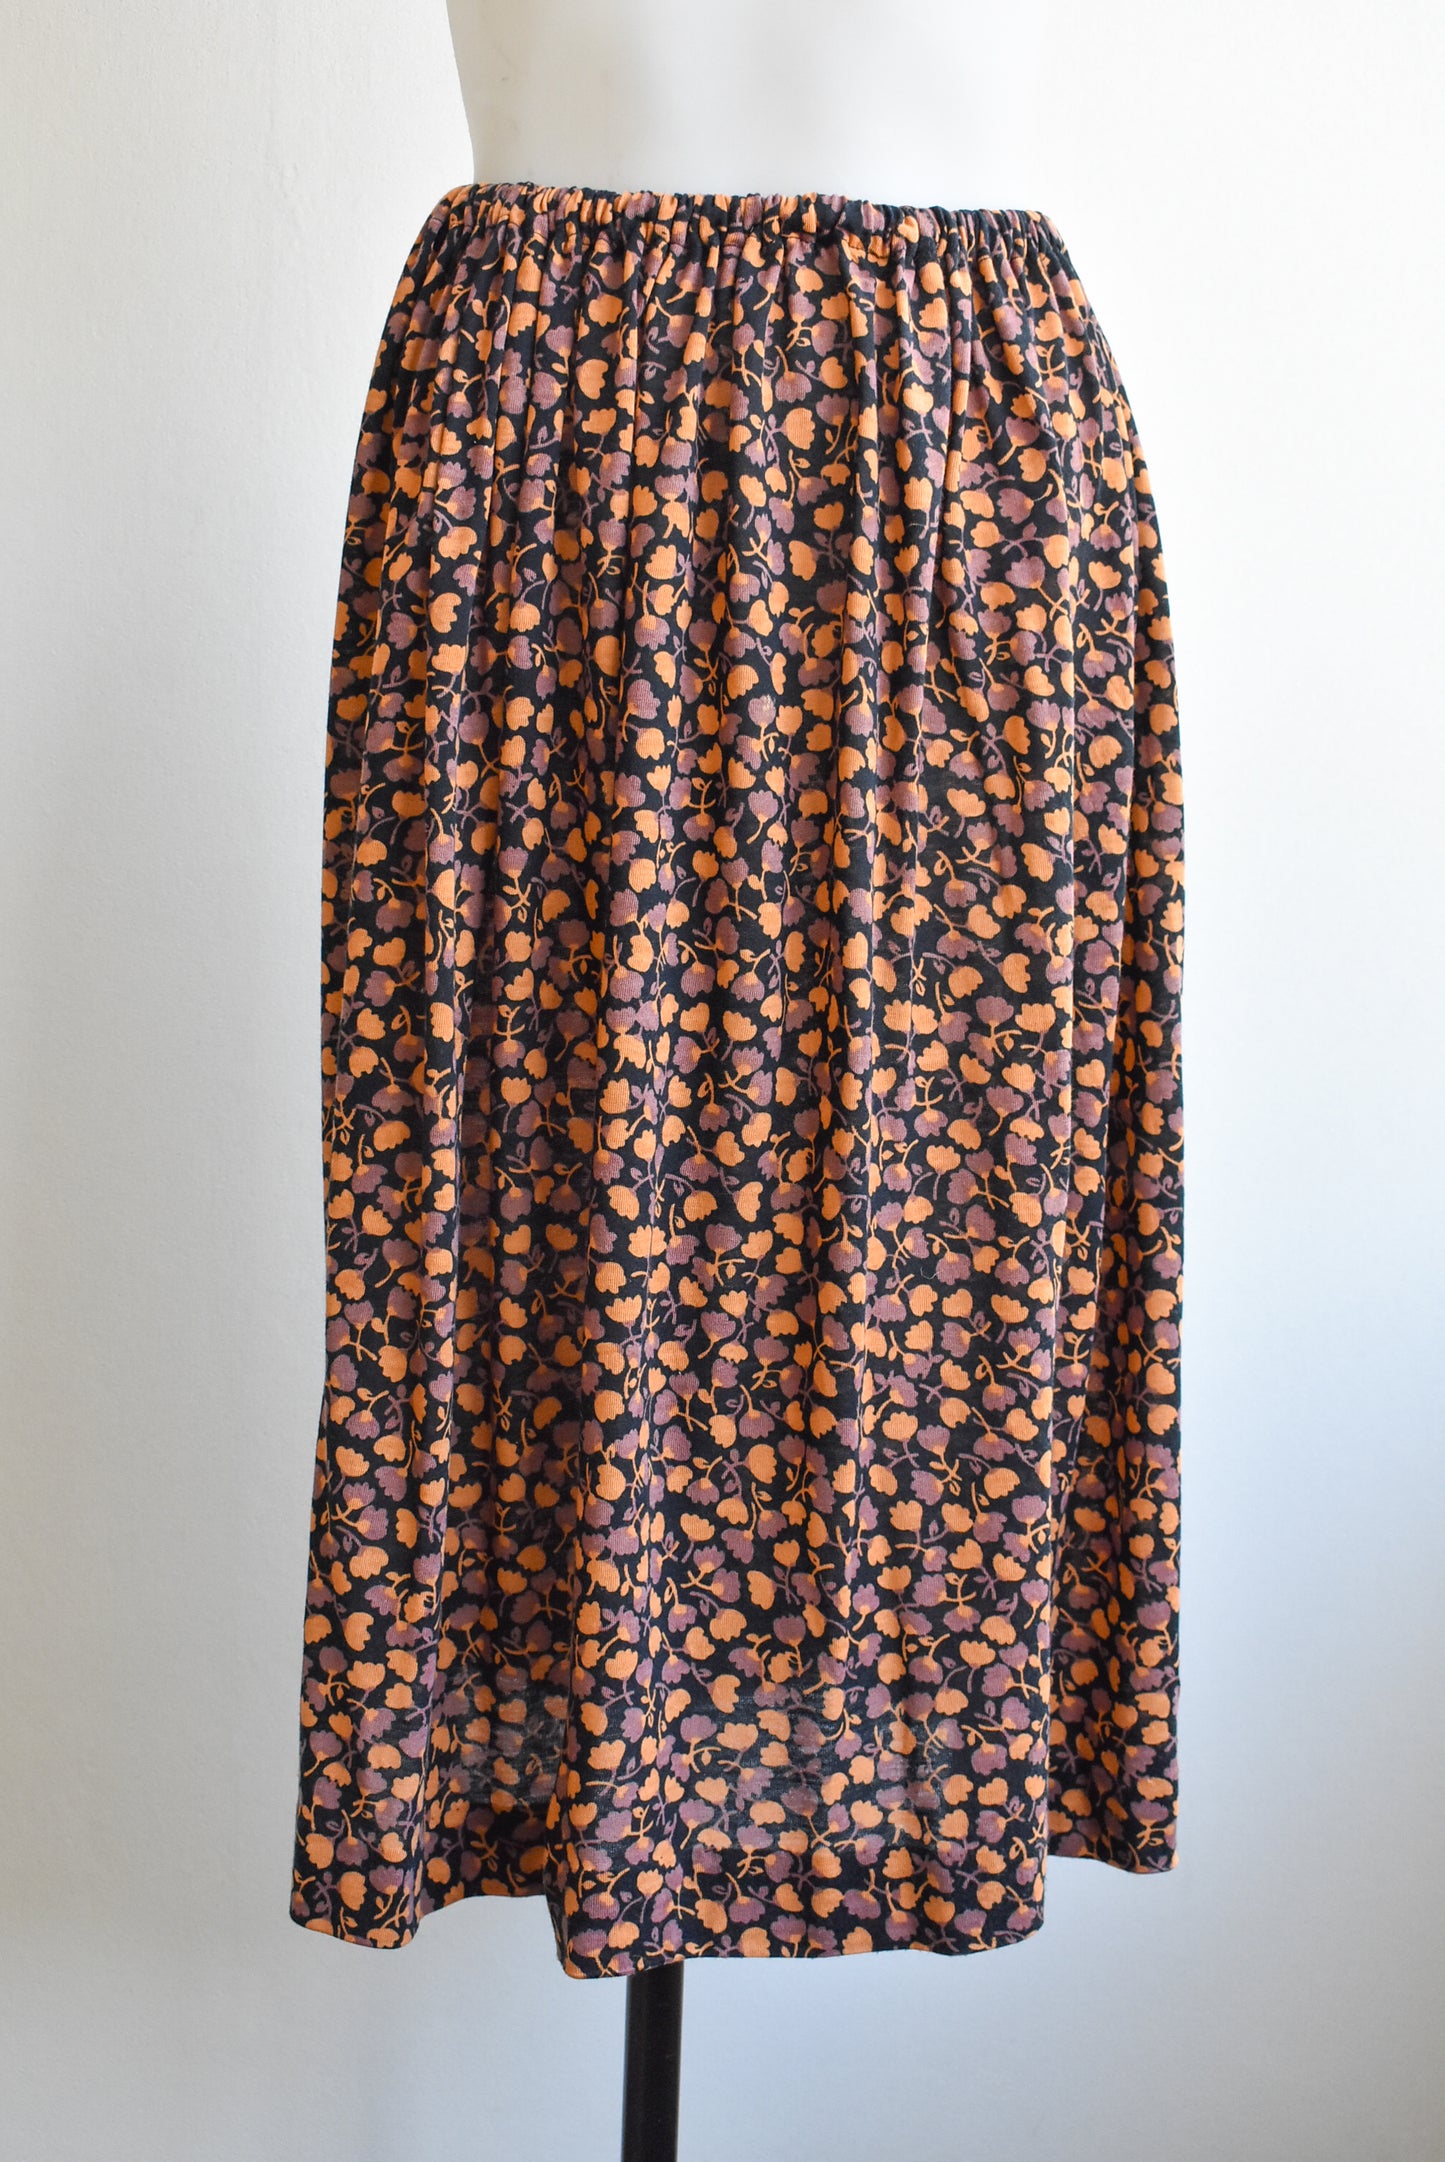 Vintage 2 piece, skirt and cardigan, size S/M